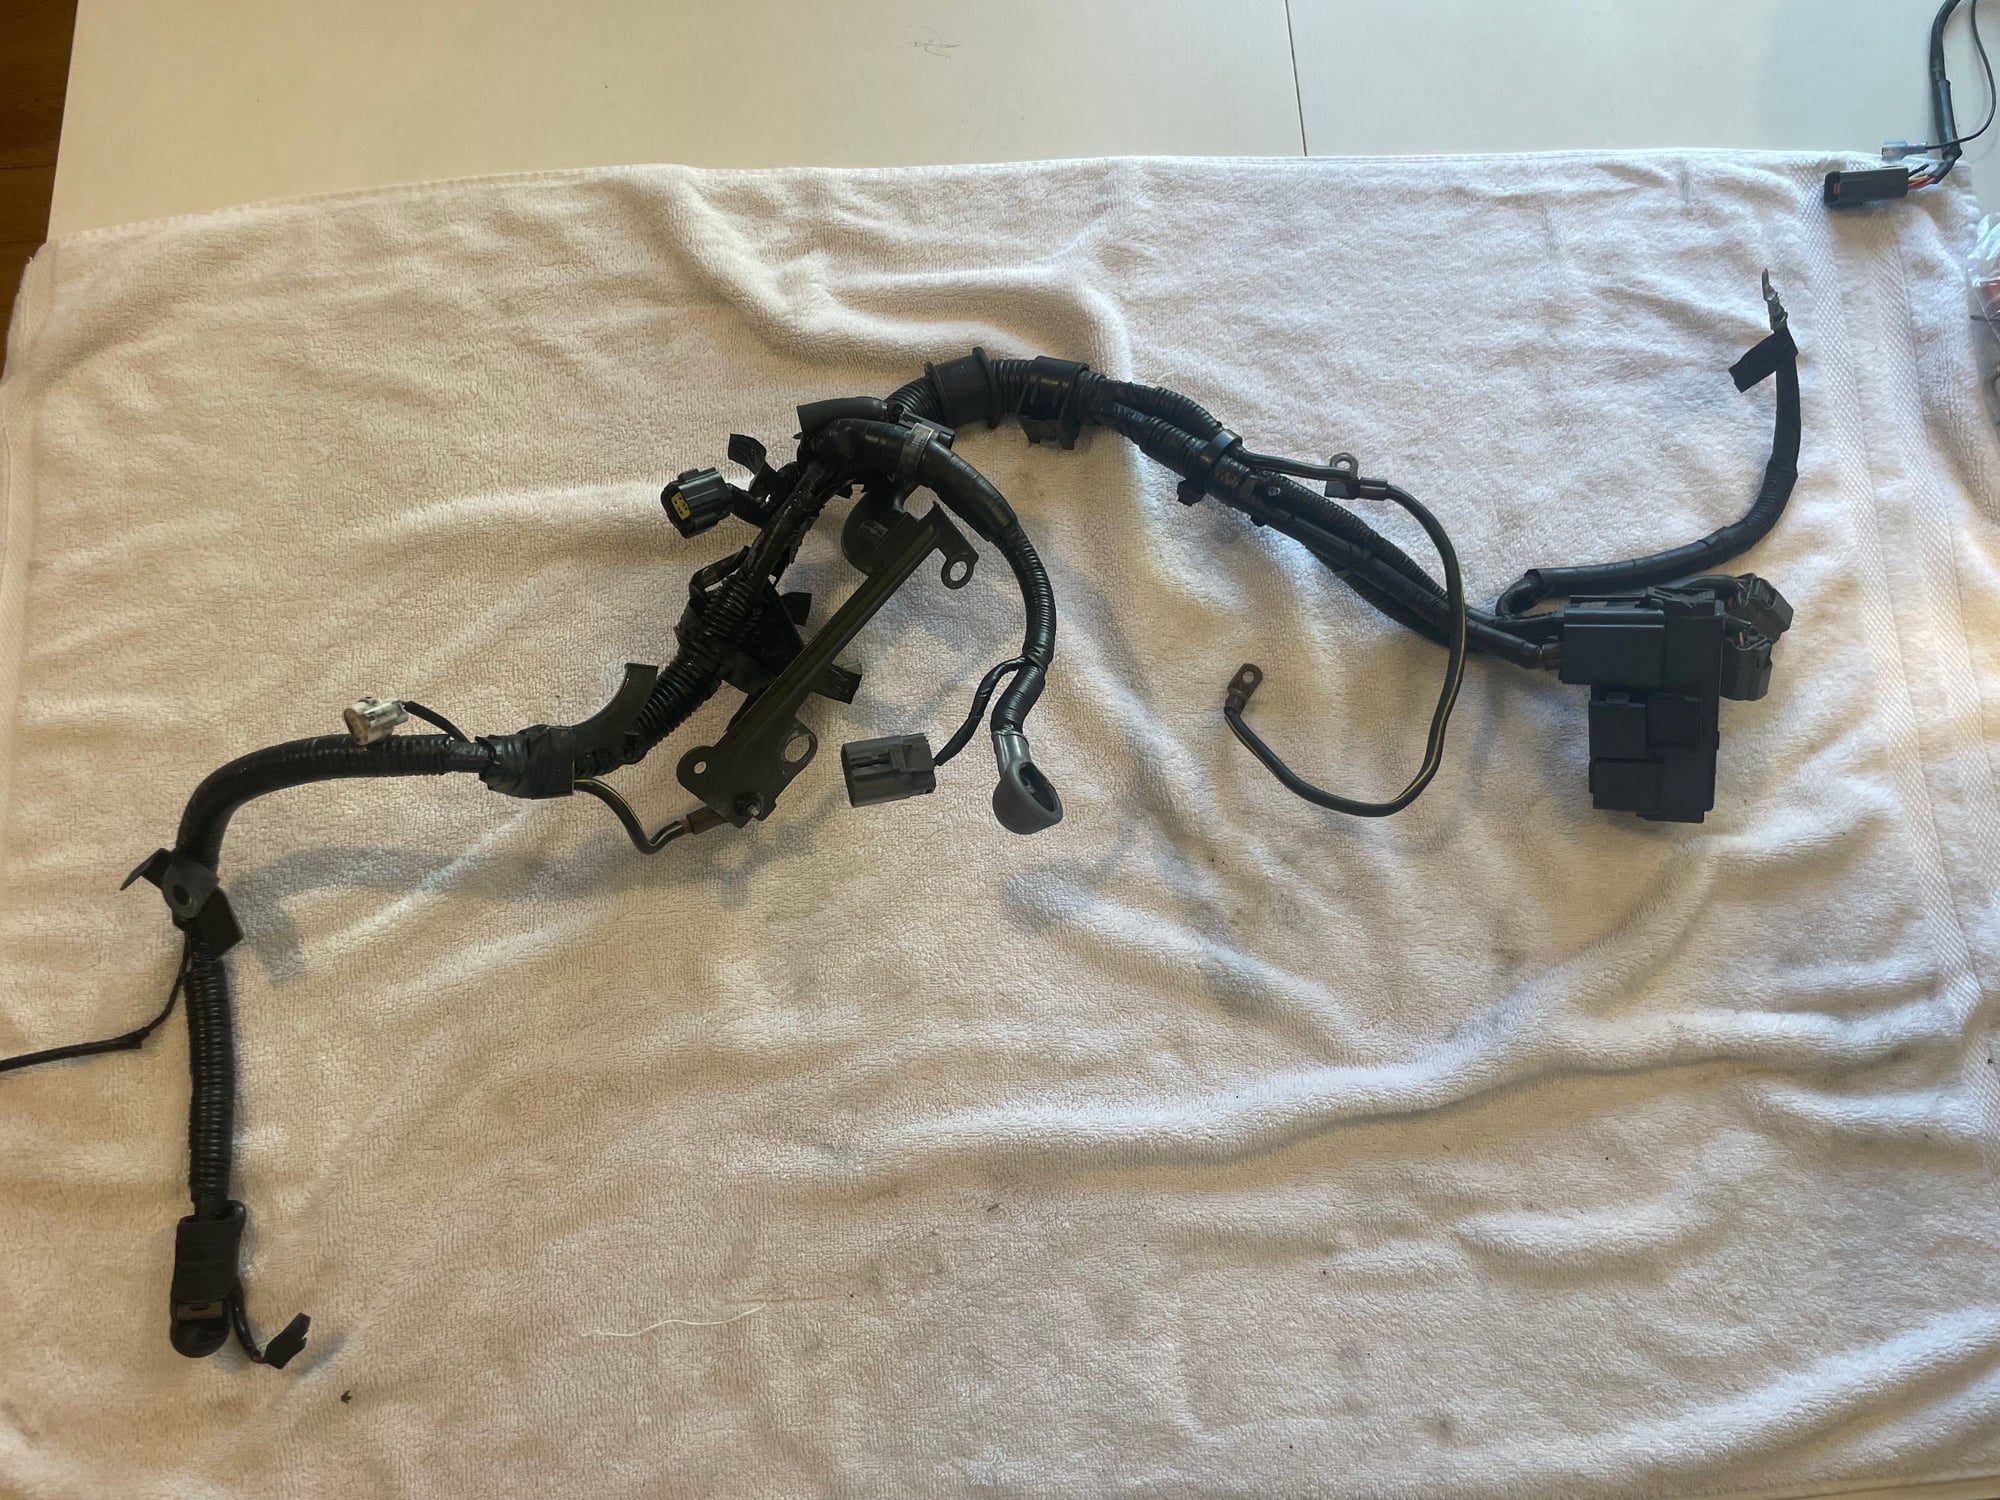 Engine - Electrical - OEM Harnesses, Adaptronic ECUs, Fuel level sender - Used - 1993 to 2002 Mazda RX-7 - Torrance, CA 90501, United States